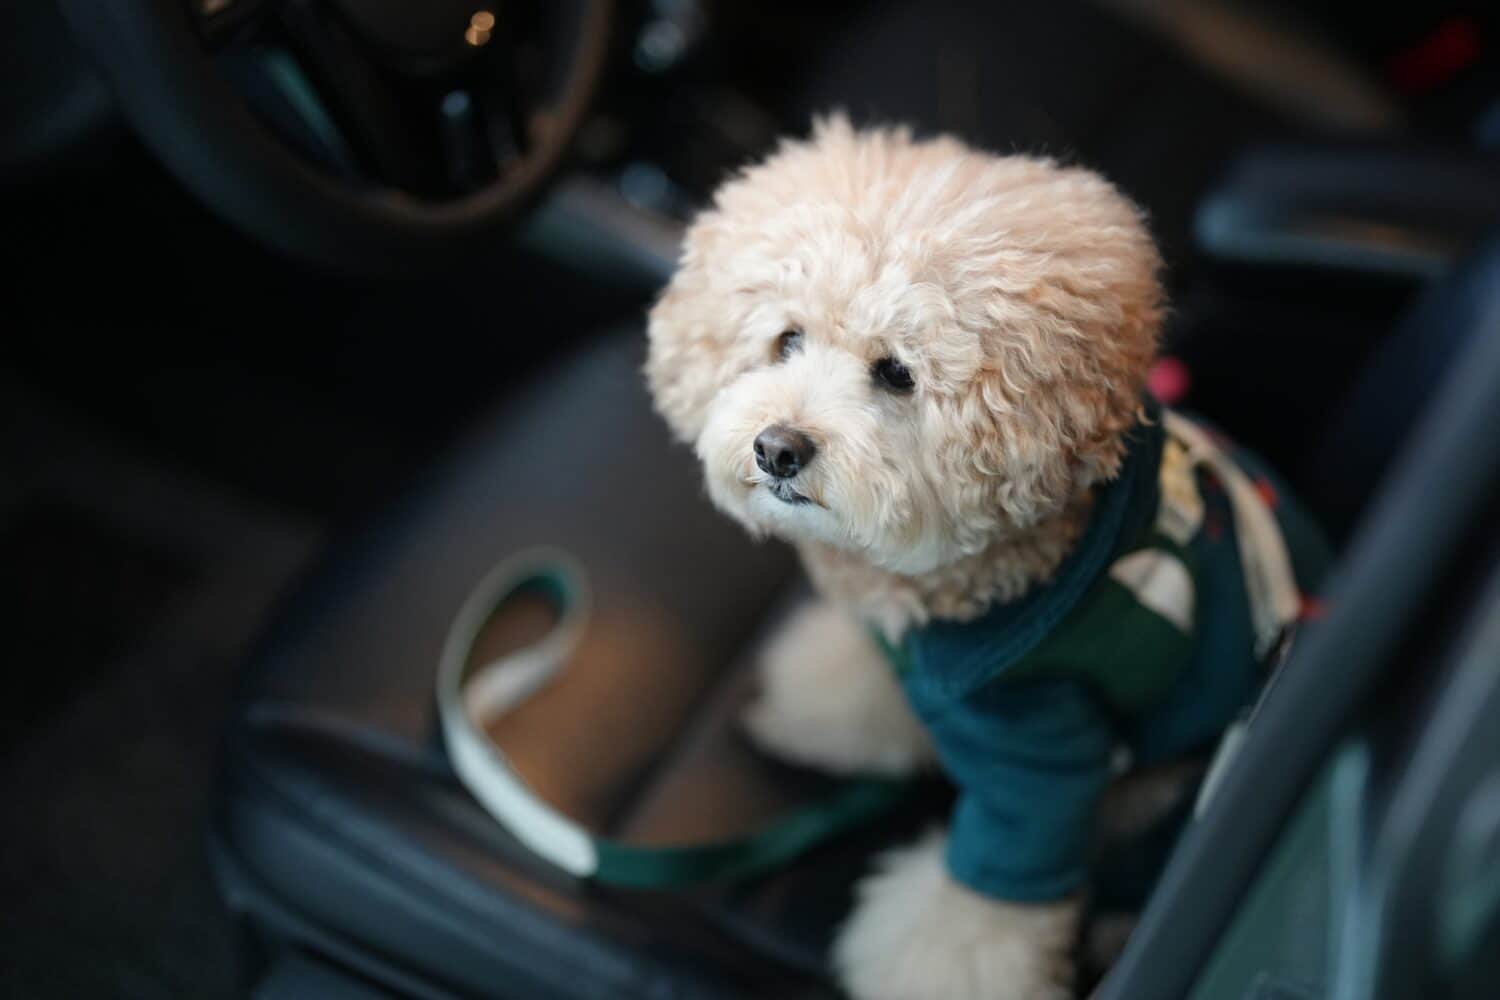 Little cream poodle in the car. a pet in a car. a dog as cute as a toy